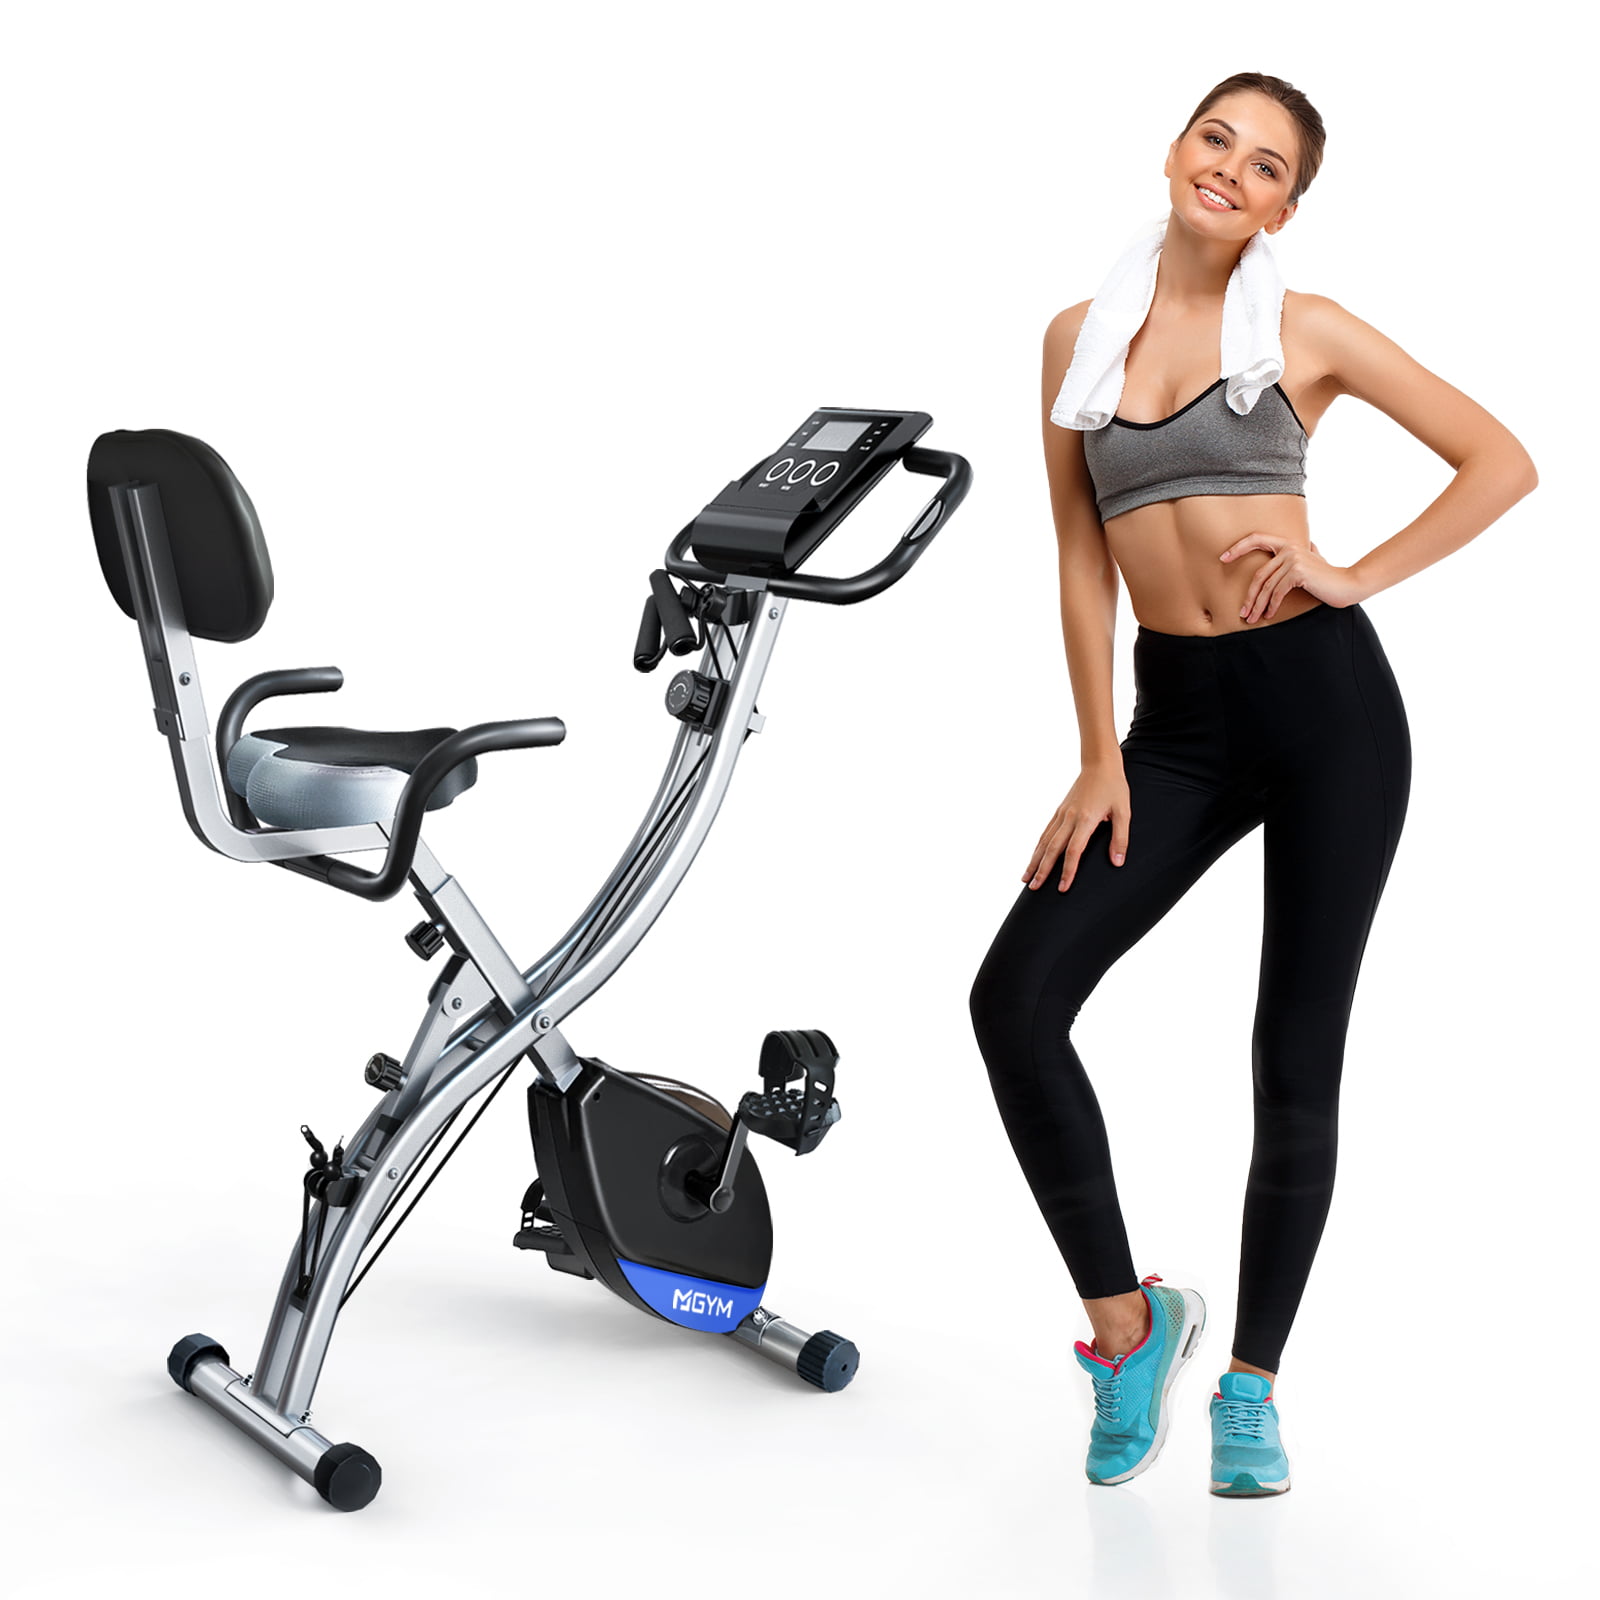 Exercise Bike Dual Motion Recumbent Fitness Sturdy Steel Frame Workout Training 